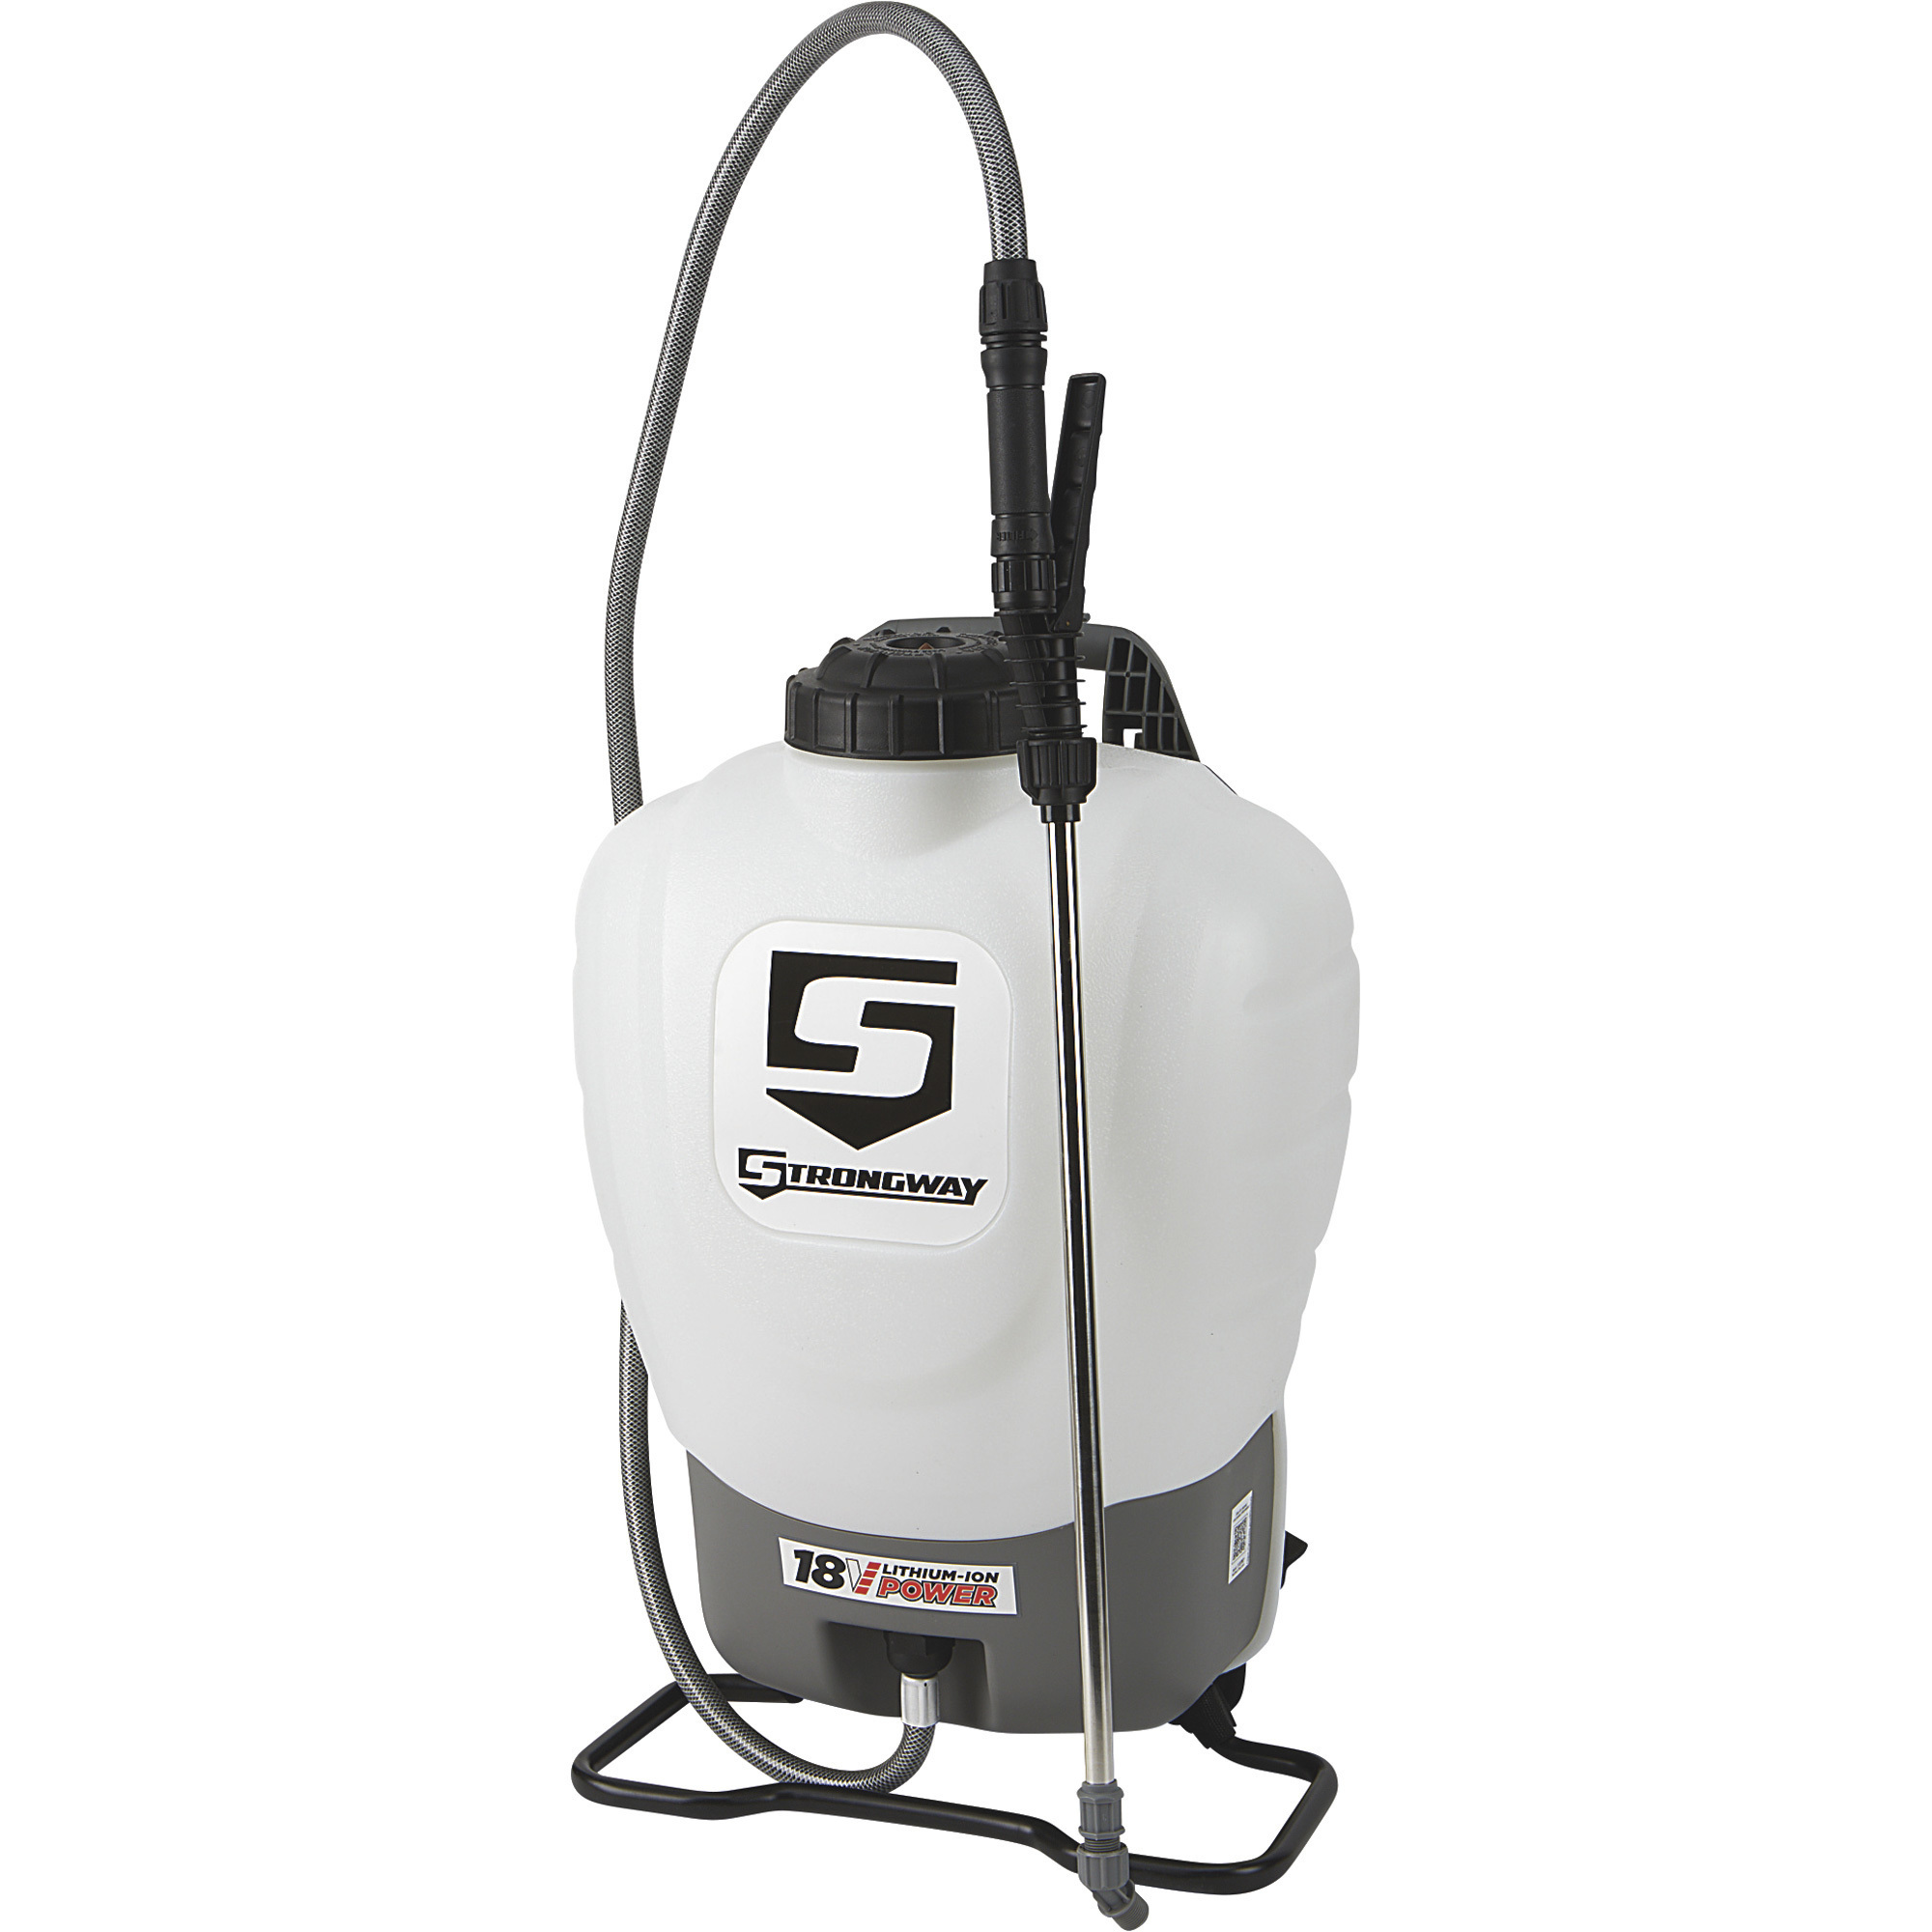 Strongway 4-Gallon 18V Lithium-Ion Never Pump Backpack Sprayer Kit, Tool, Battery and Accessories, Model 190755